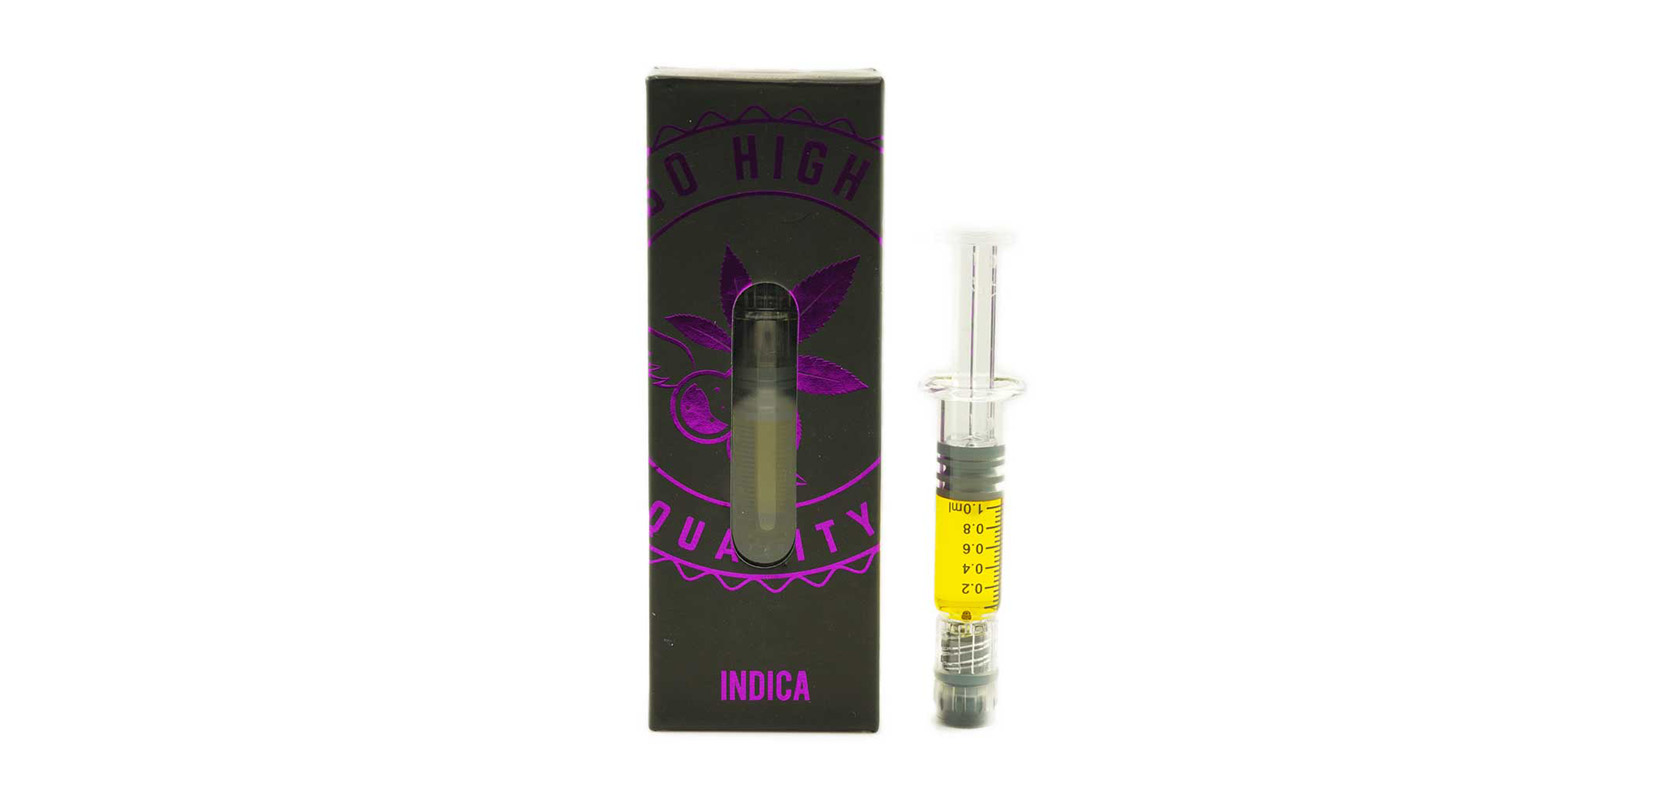 So High Extracts Granddaddy Purple Distillate Weed Concentrate. Buy weed online in Canada.